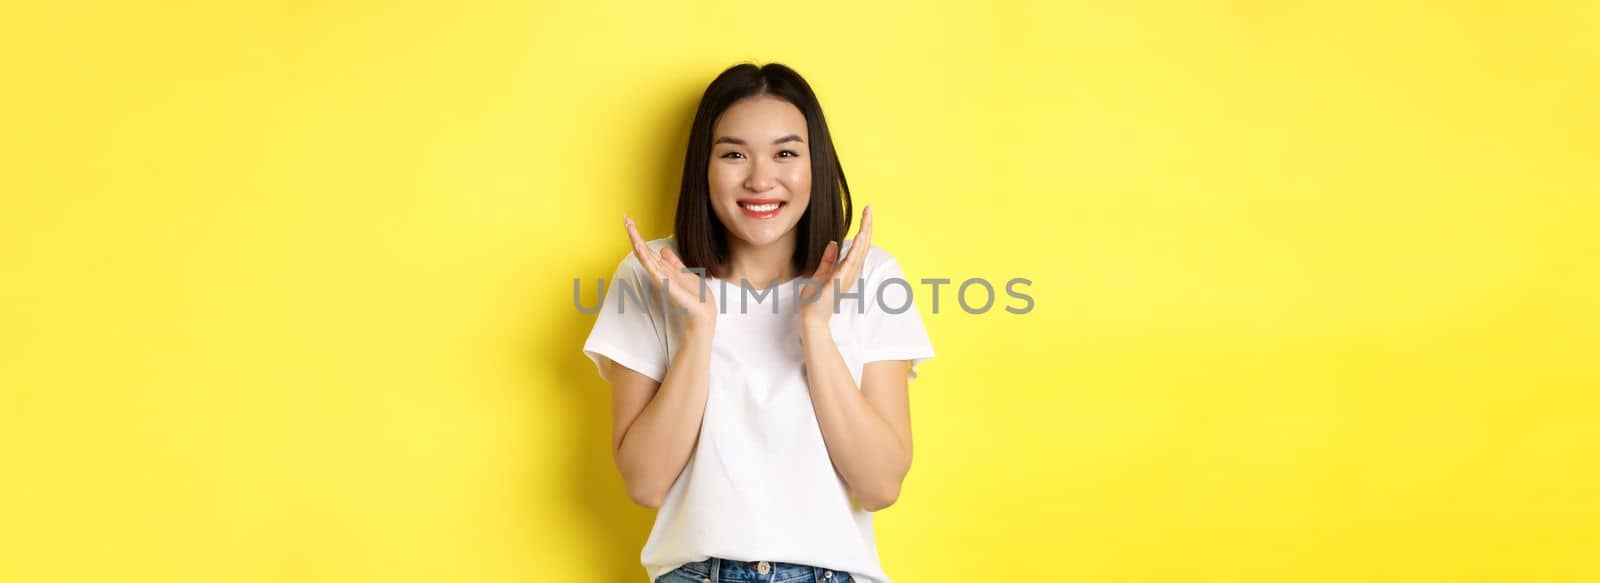 Beauty and fashion concept. Excited asian woman clap hands and smiling happy at camera, standing in white t-shirt against yellow background.